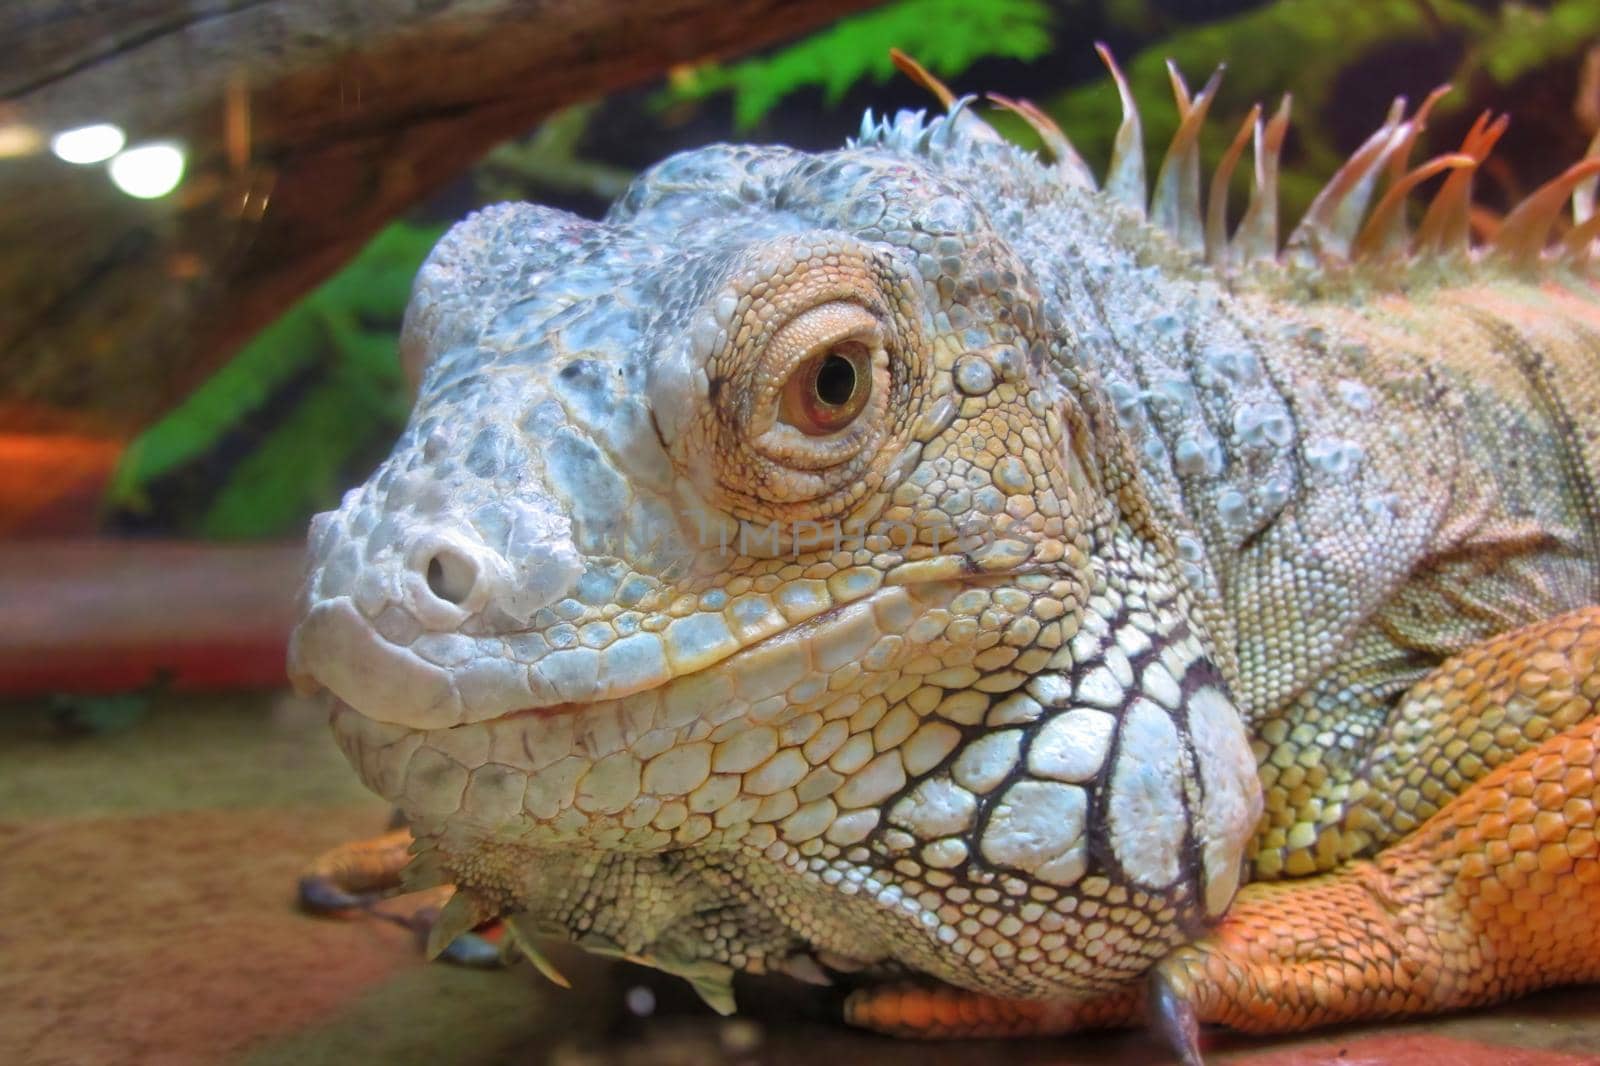 On image: The Red Iguana closeup image also known as the American iguana, is a large, arboreal, mostly herbivorous species of lizard